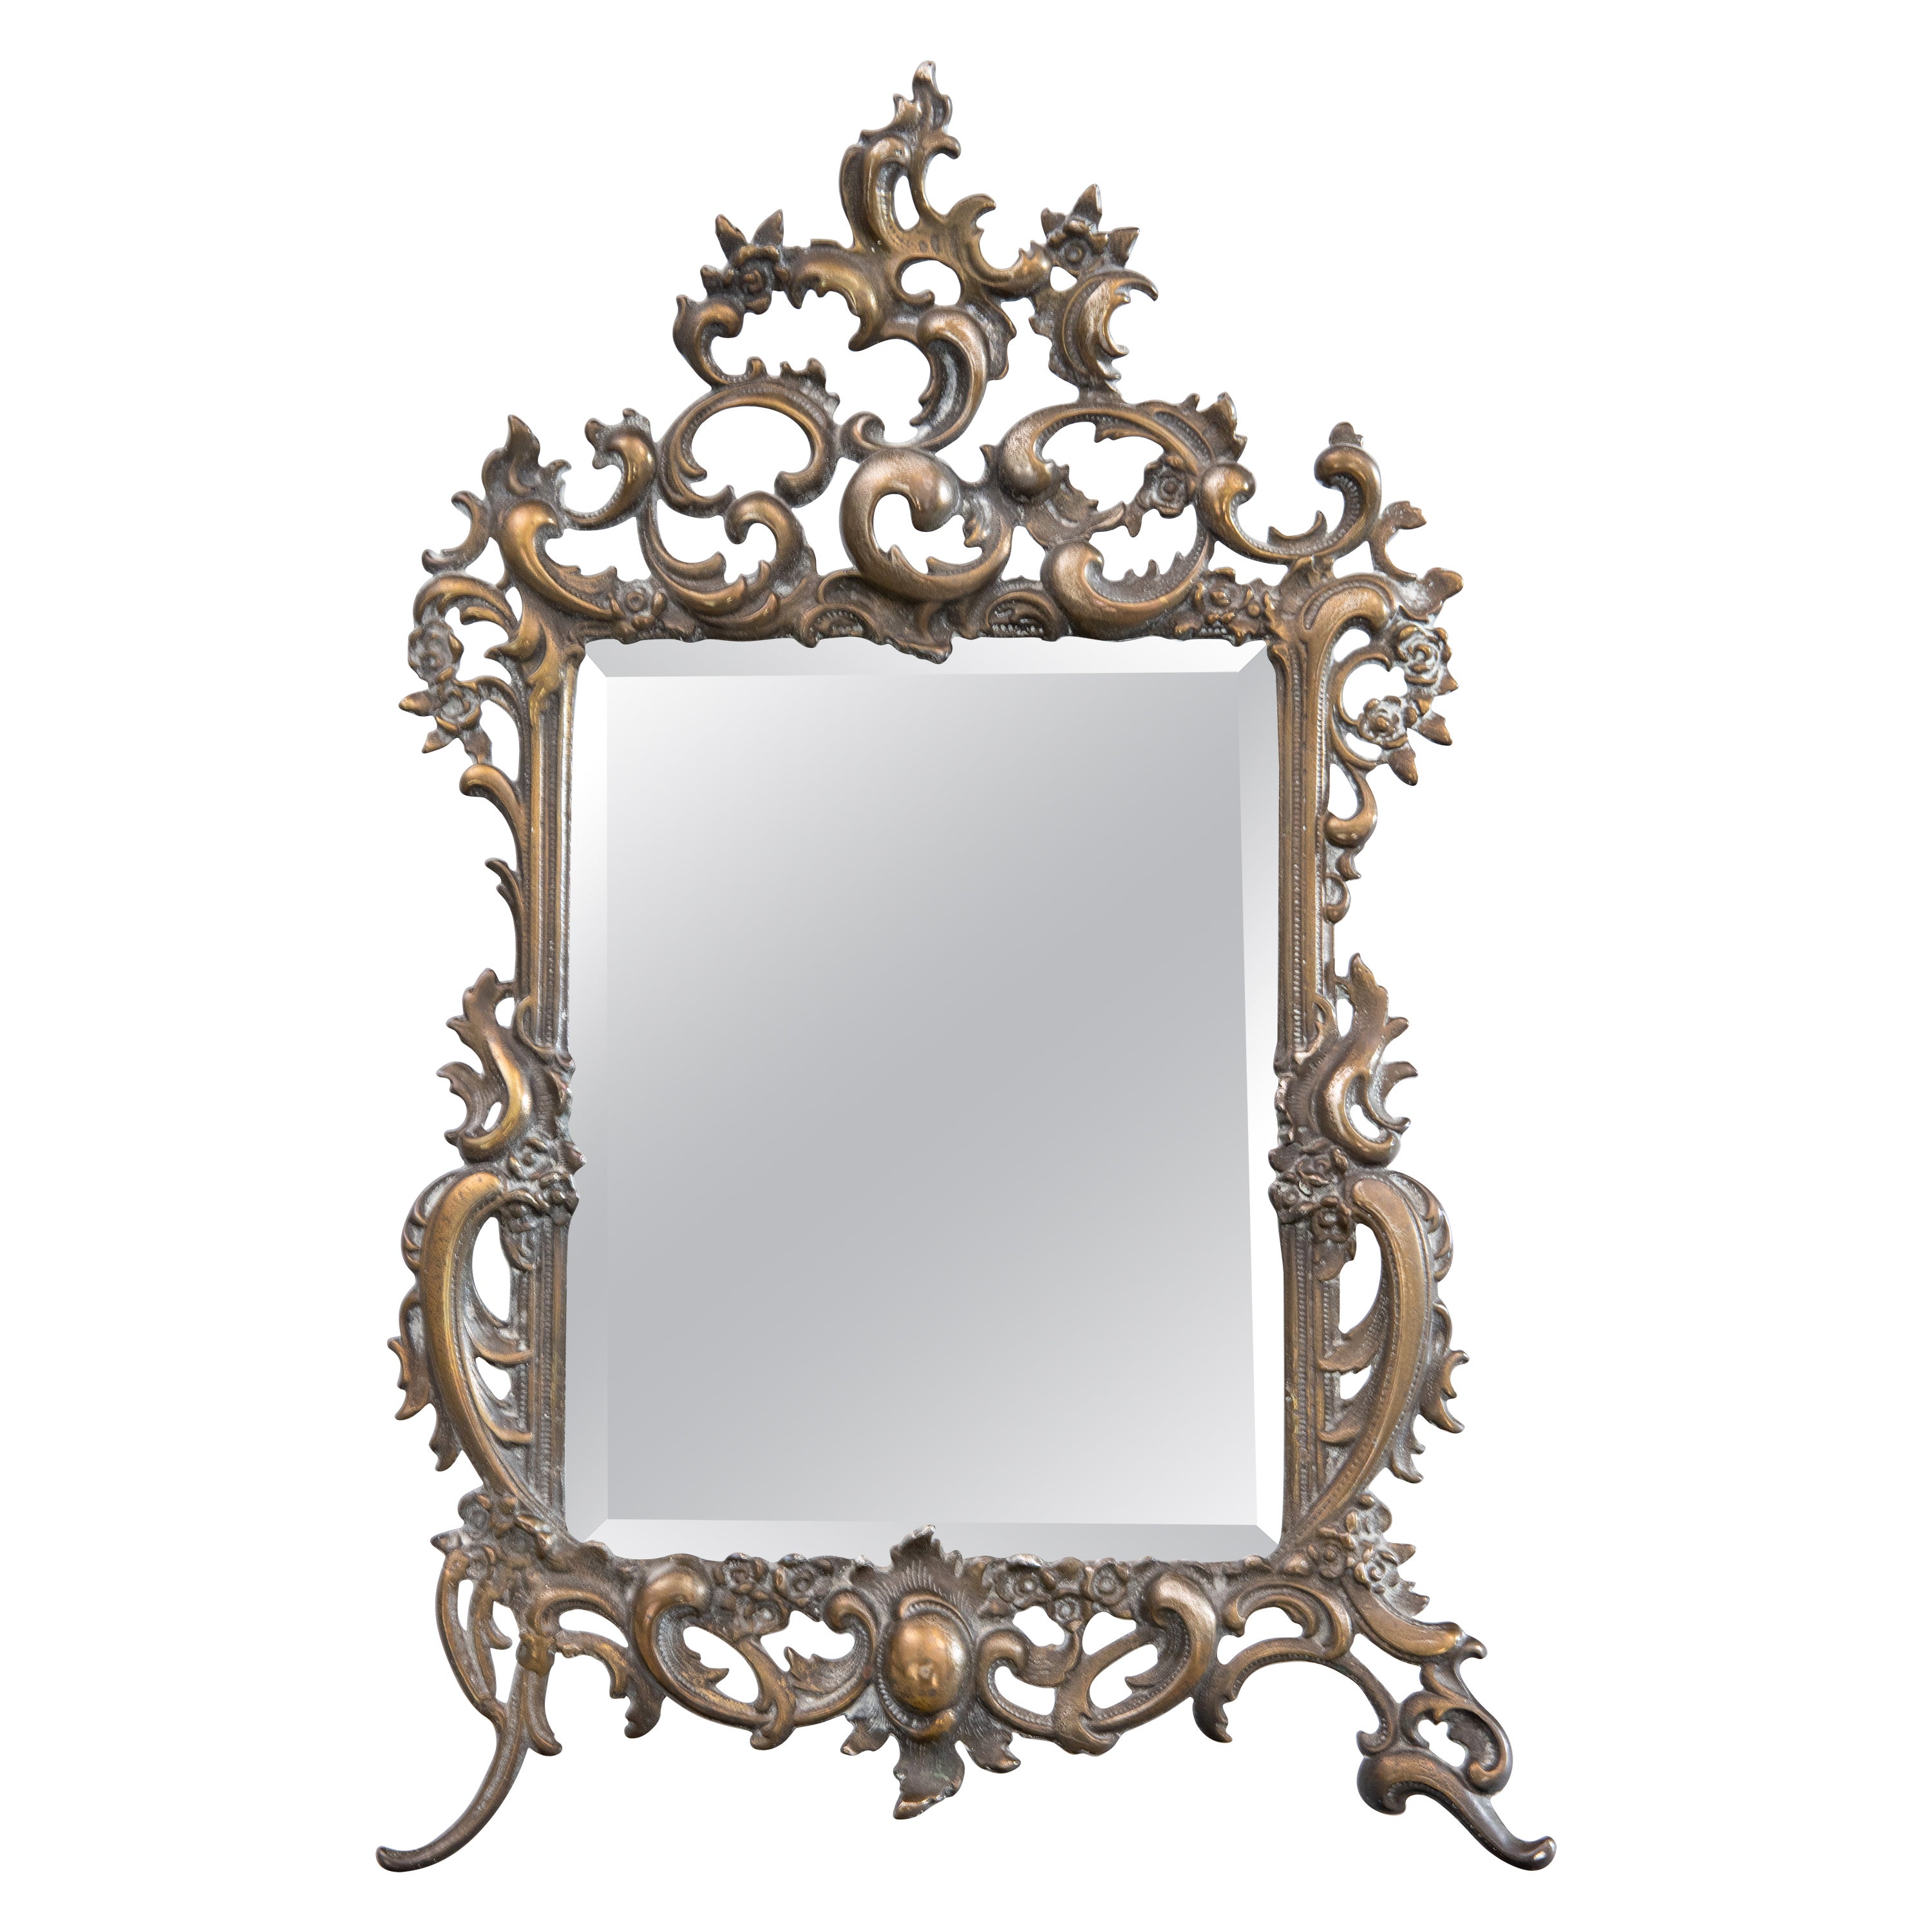 Antique Rococo Style French Brass Vanity Dresser Table Mirror, circa 1900 For Sale